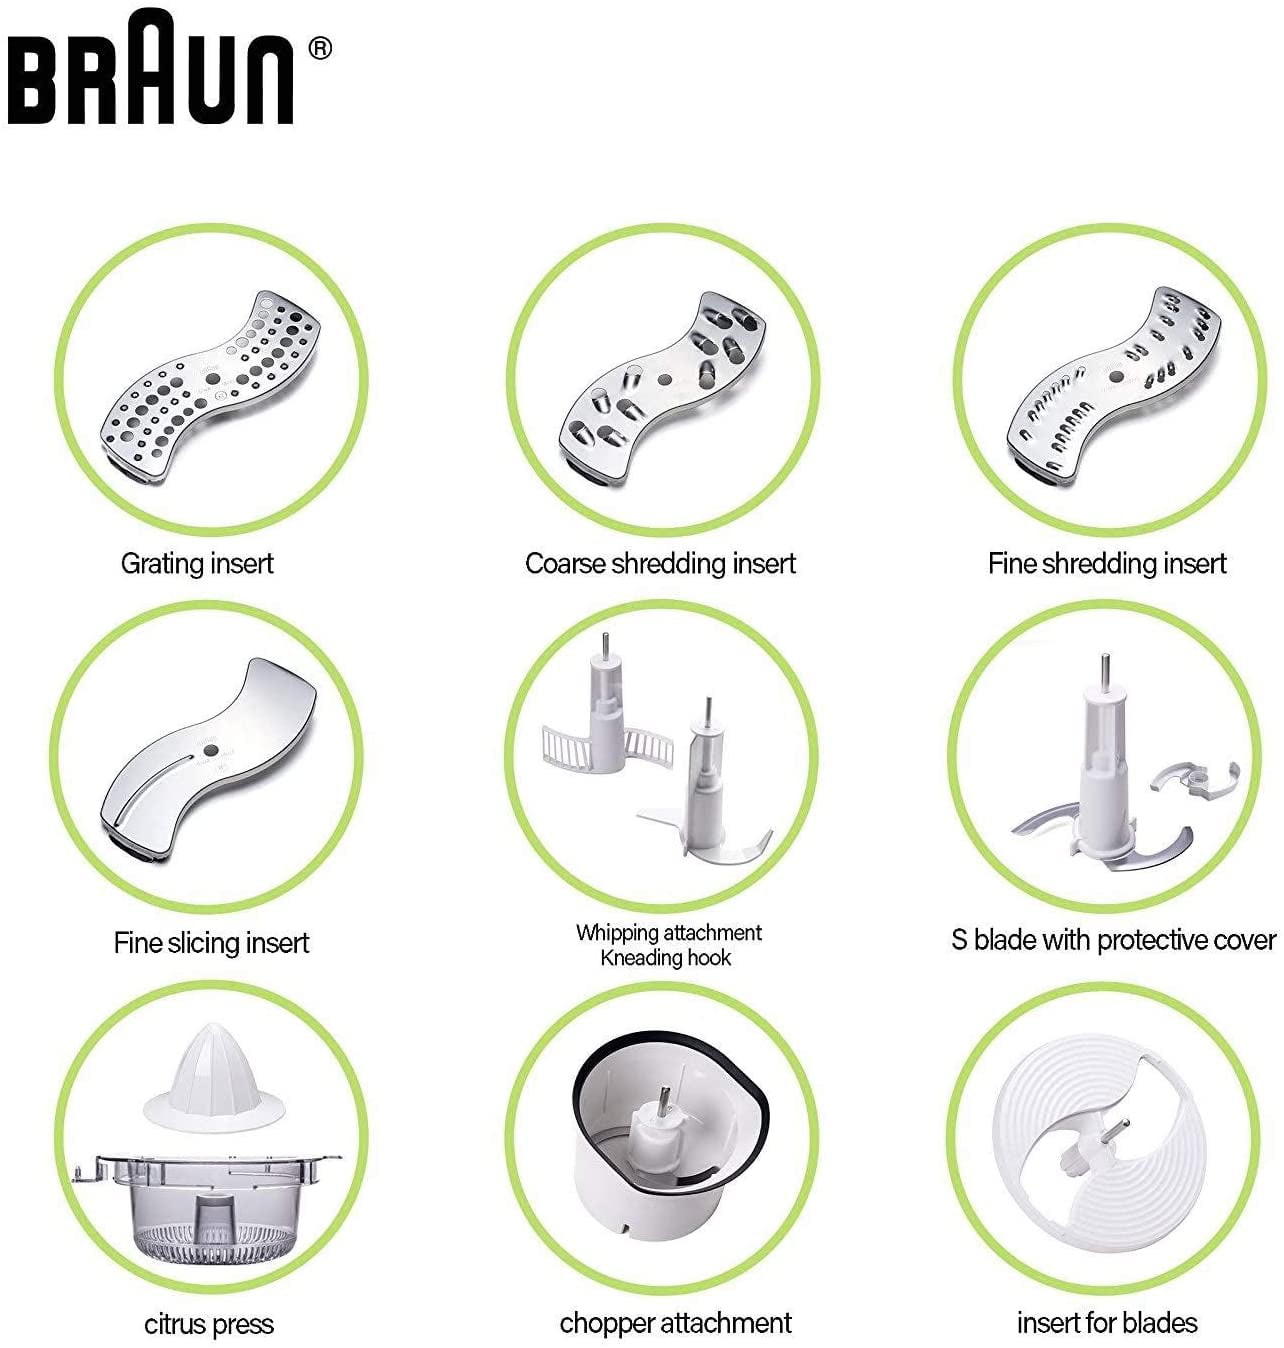 braun fp3020 12-cup food processor ultra quiet powerful european made with  german engineering 220 volts 50hz (not for usa)